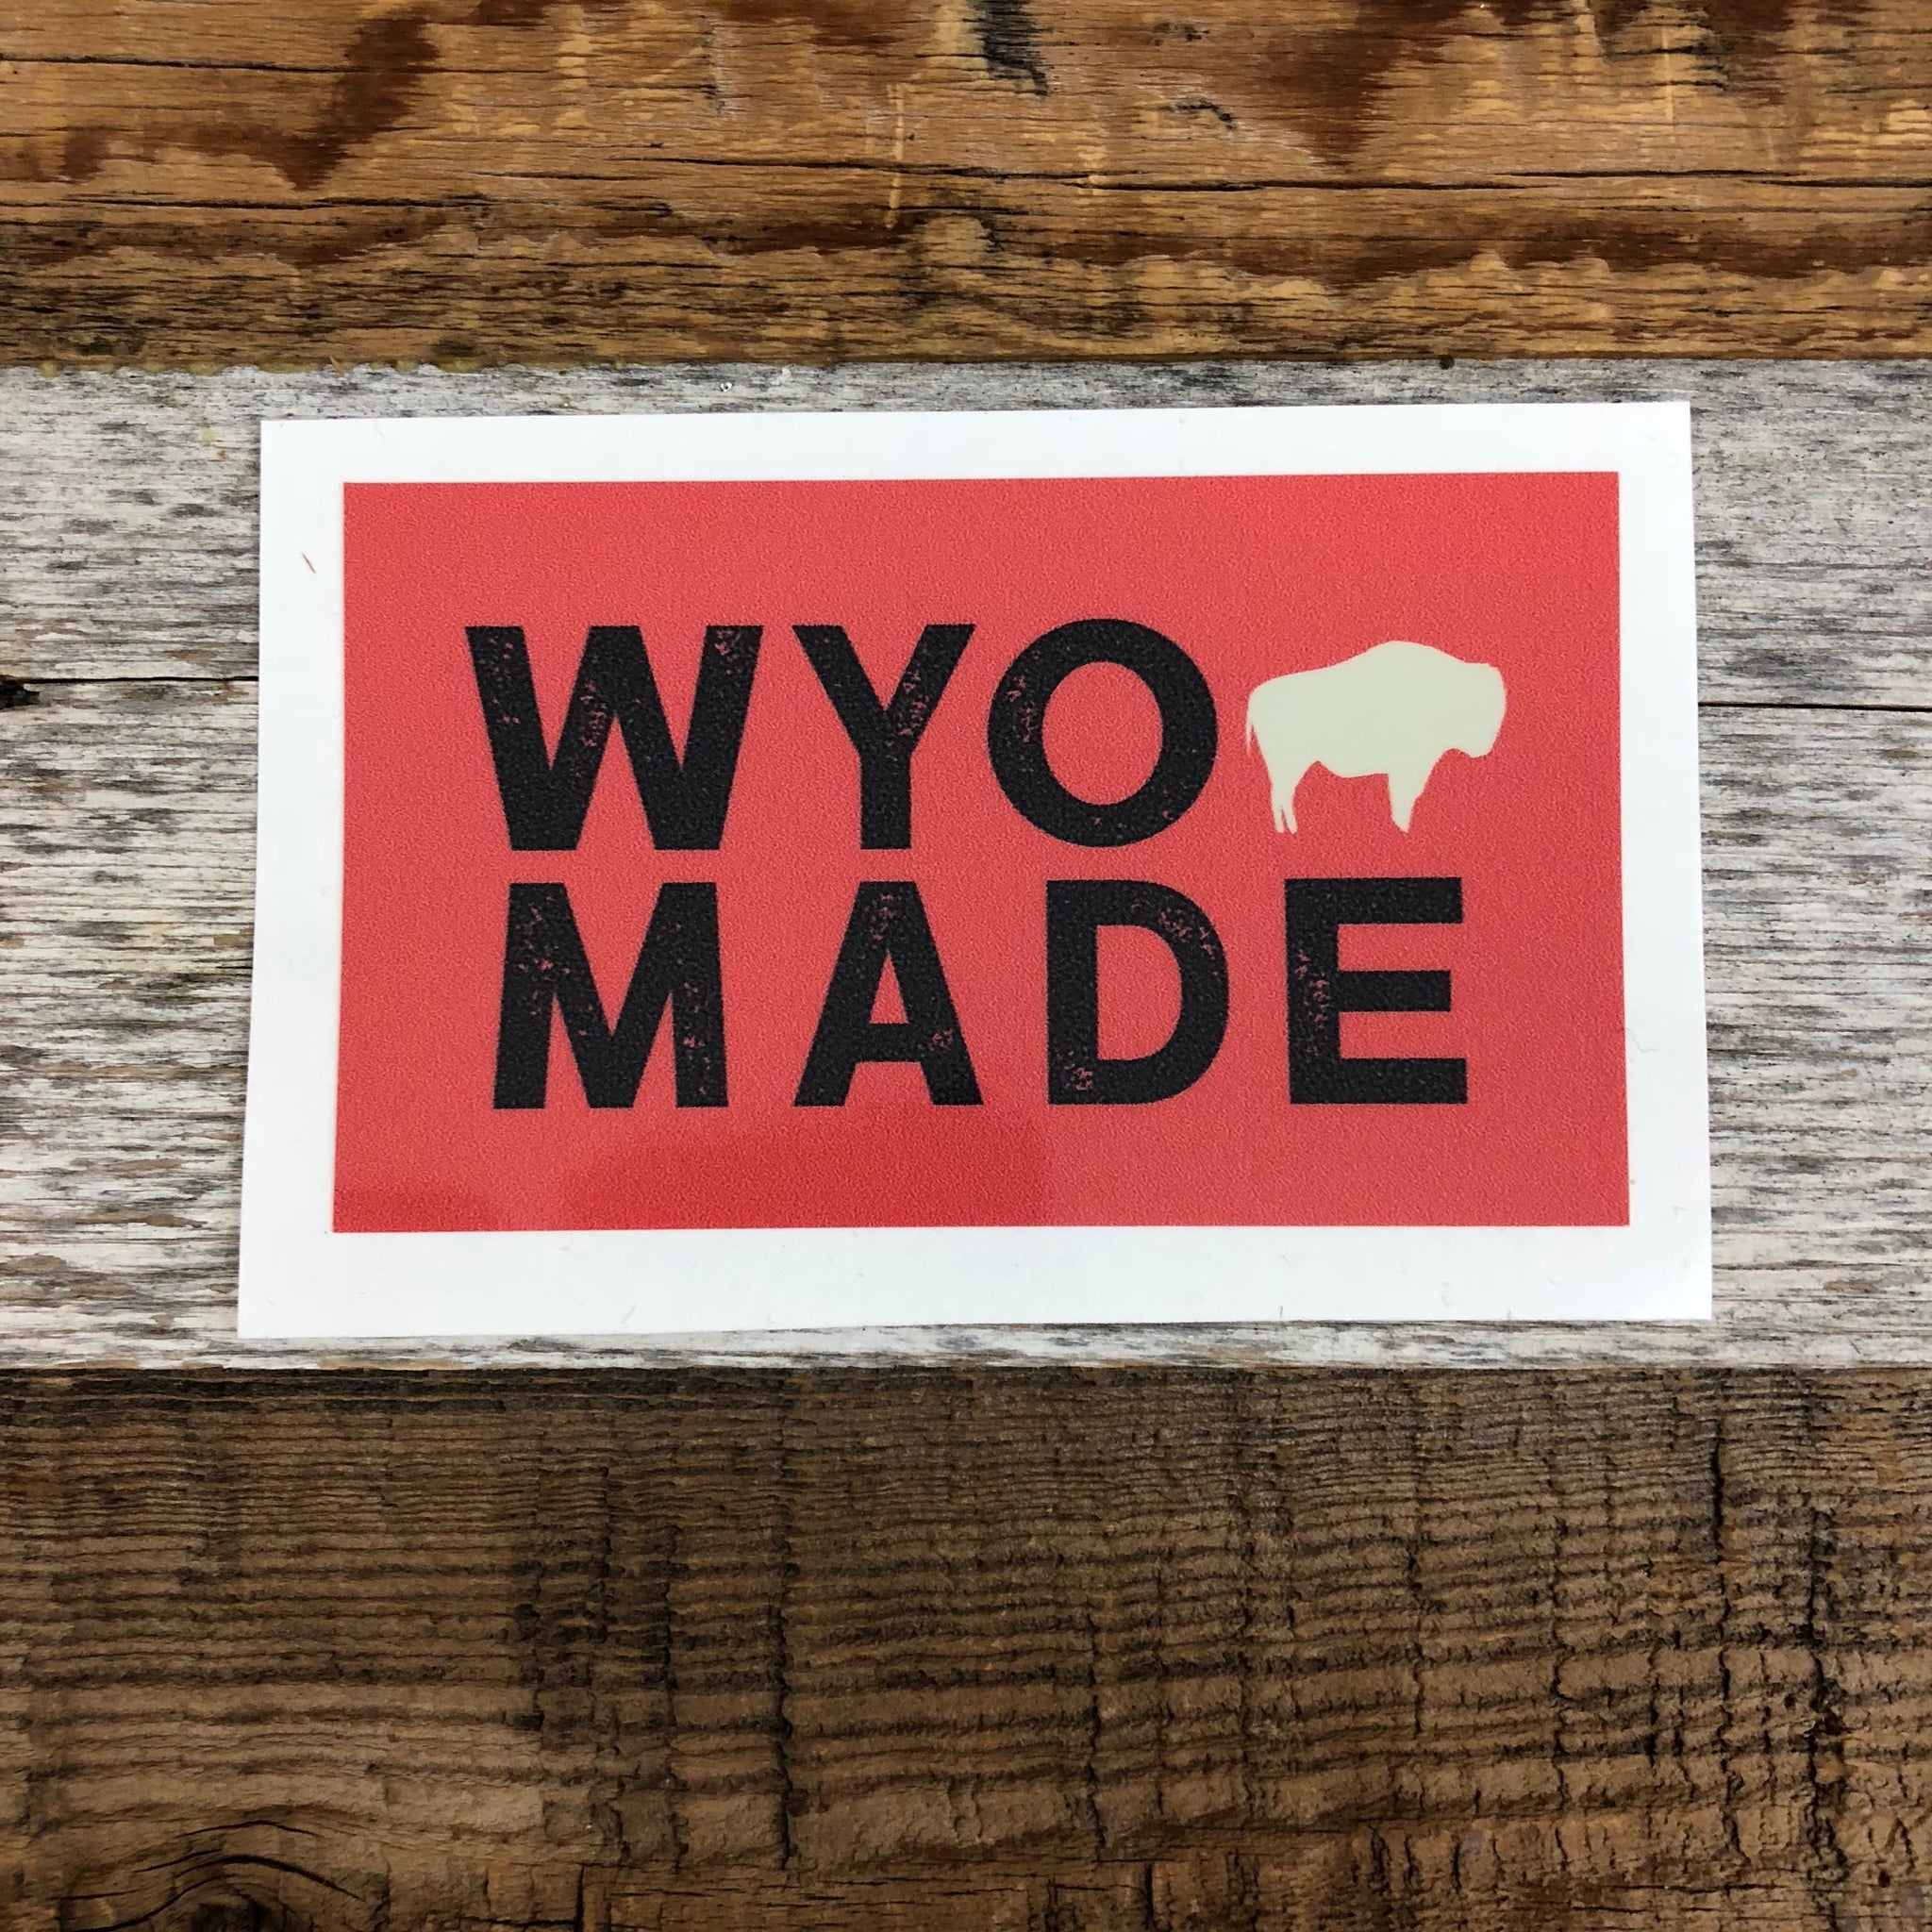 The New Bison Moon is a modern twist on our long time iconic design from WyoMade!   The Bison represents freedom and is a staple of Wyoming's open spaces. This sticker is sure to appease your desire to roam free.  Be a part of the herd with the WyoMade Tag Logo Sticker from Wyomade.     Size:  2.4" x 4"